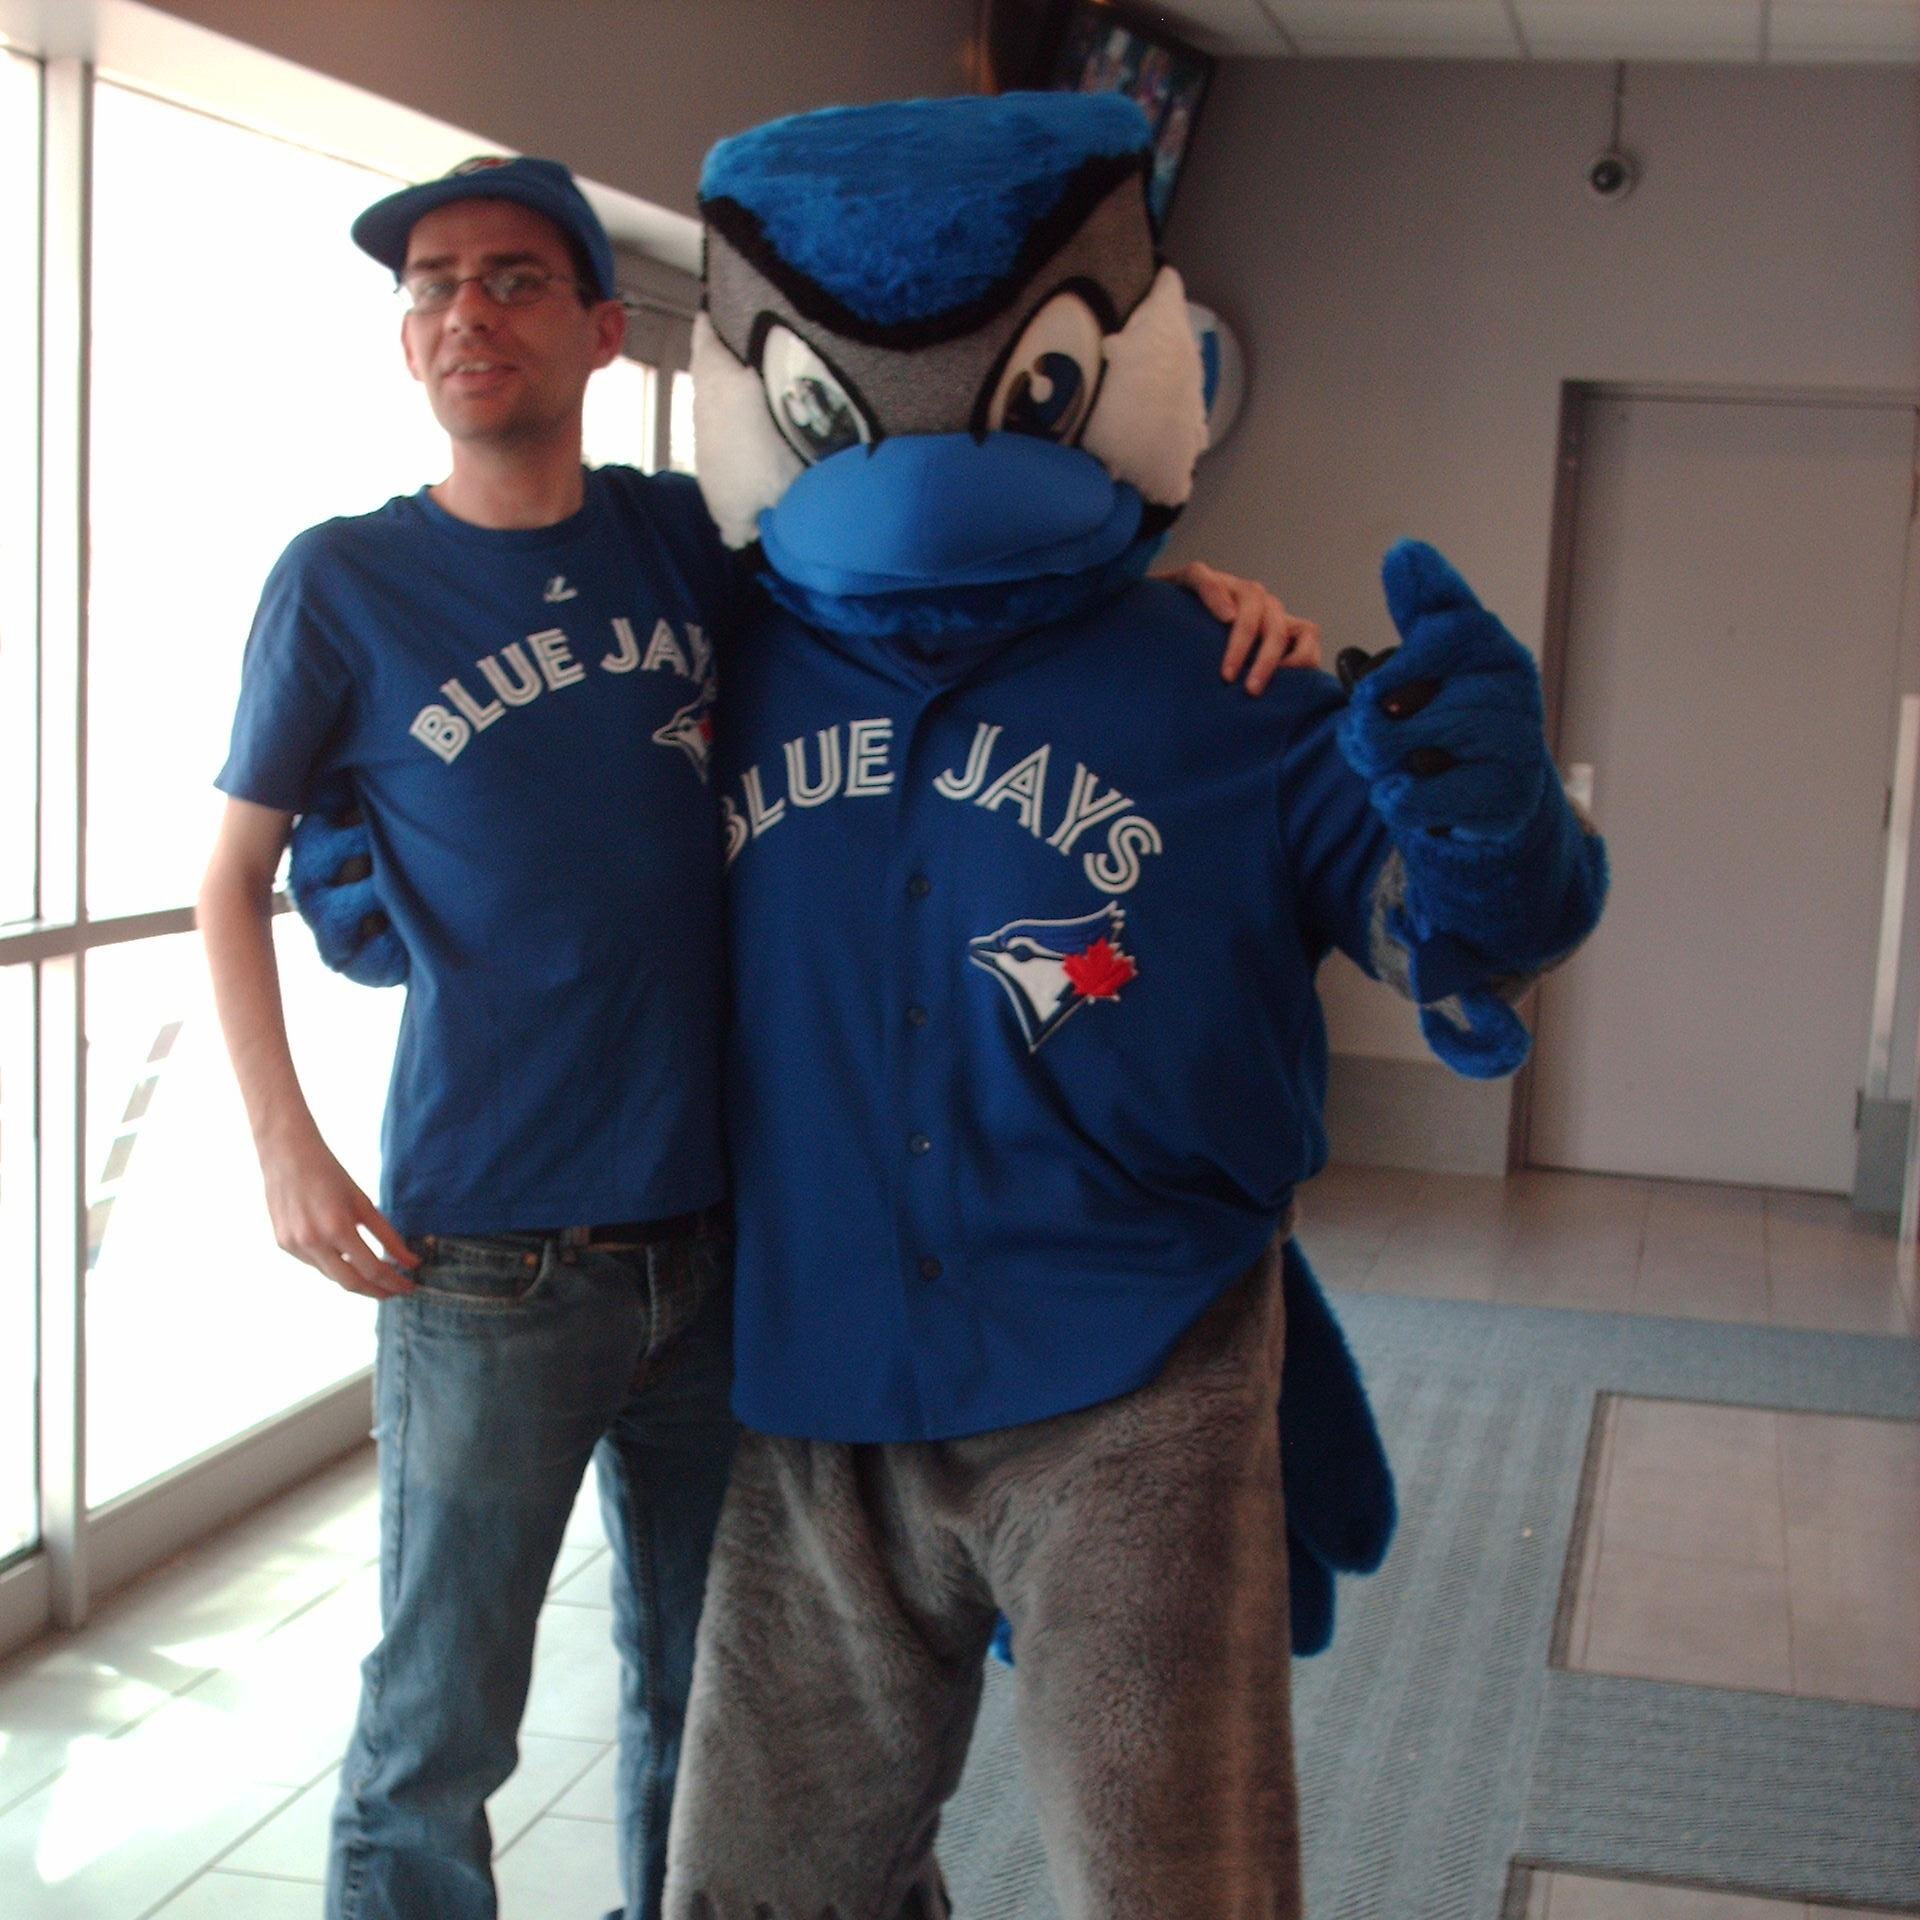 Mascot fan and performer, Jays fan, Library Technician and Accounting graduate